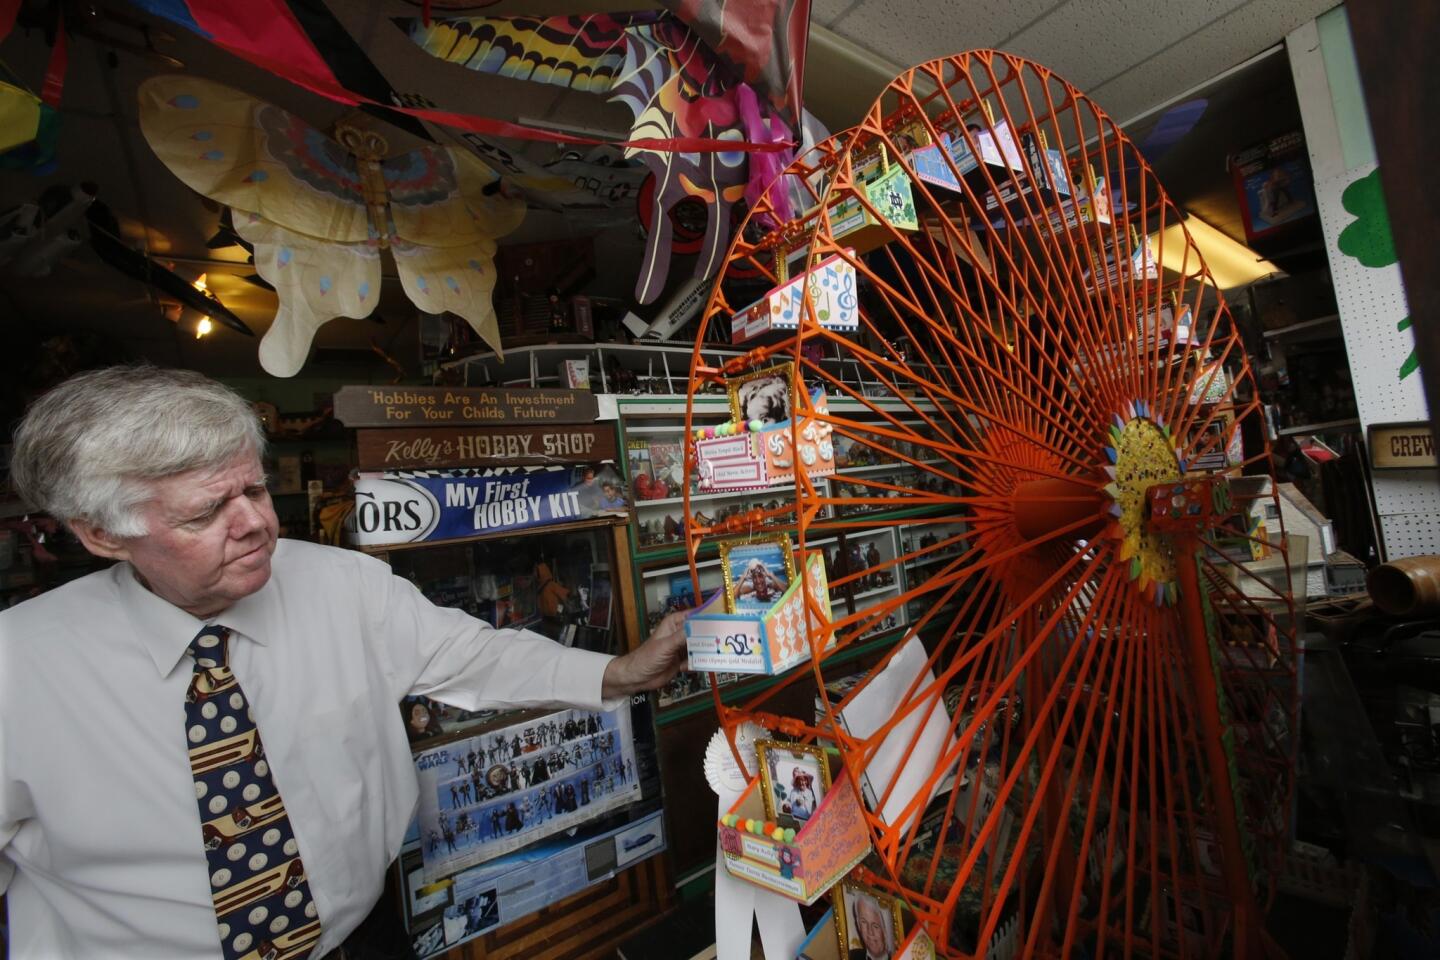 Gregory Kelly, who creates scale models of attractions out of scraps, spins a ferris wheel he made at Kelly's Hobby Shop in Old Town Tustin on March 24, 2014.